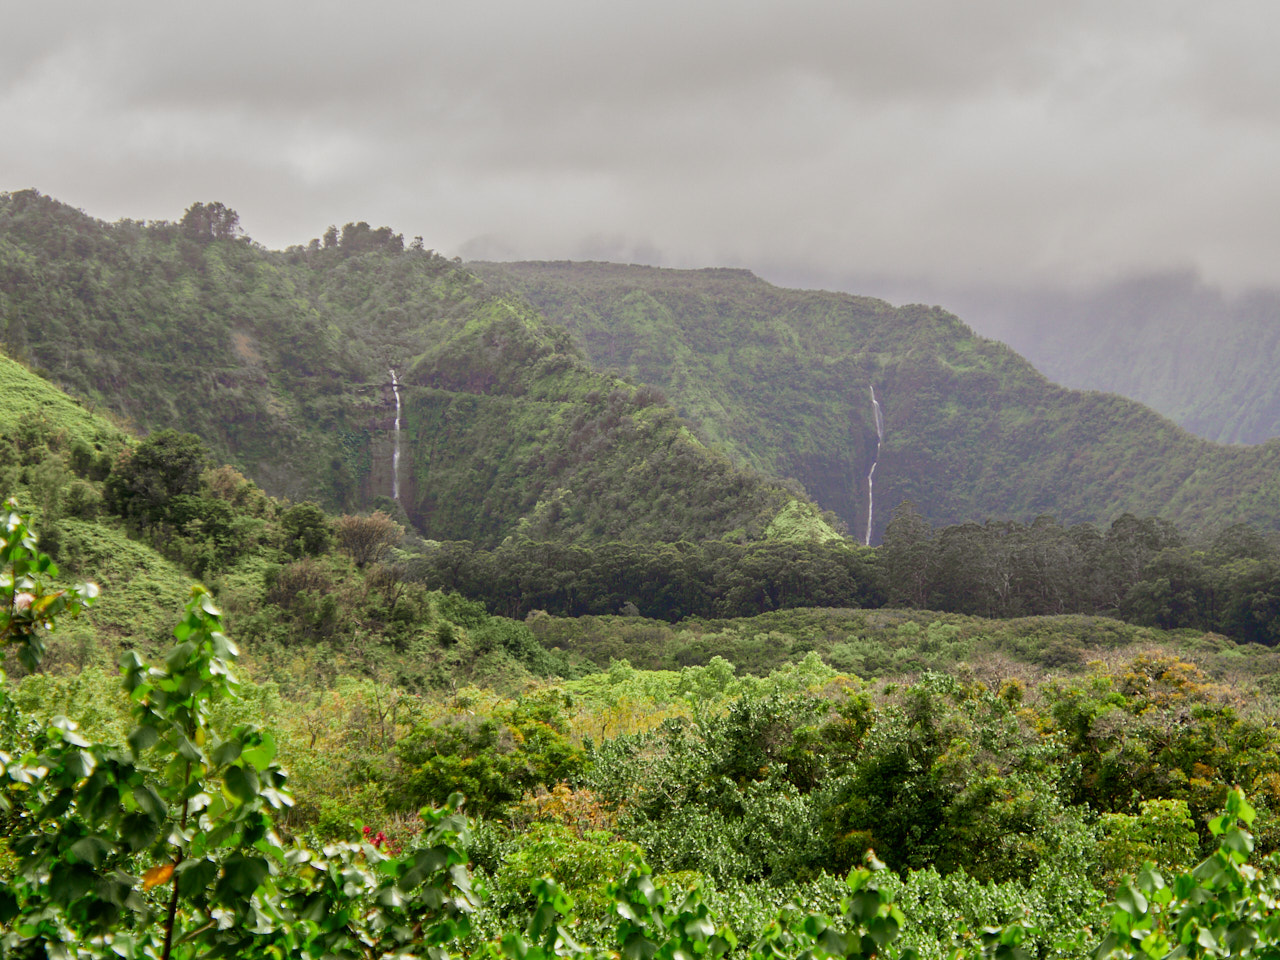 These dual waterfalls are the main attraction at the Wailua State Wayside.